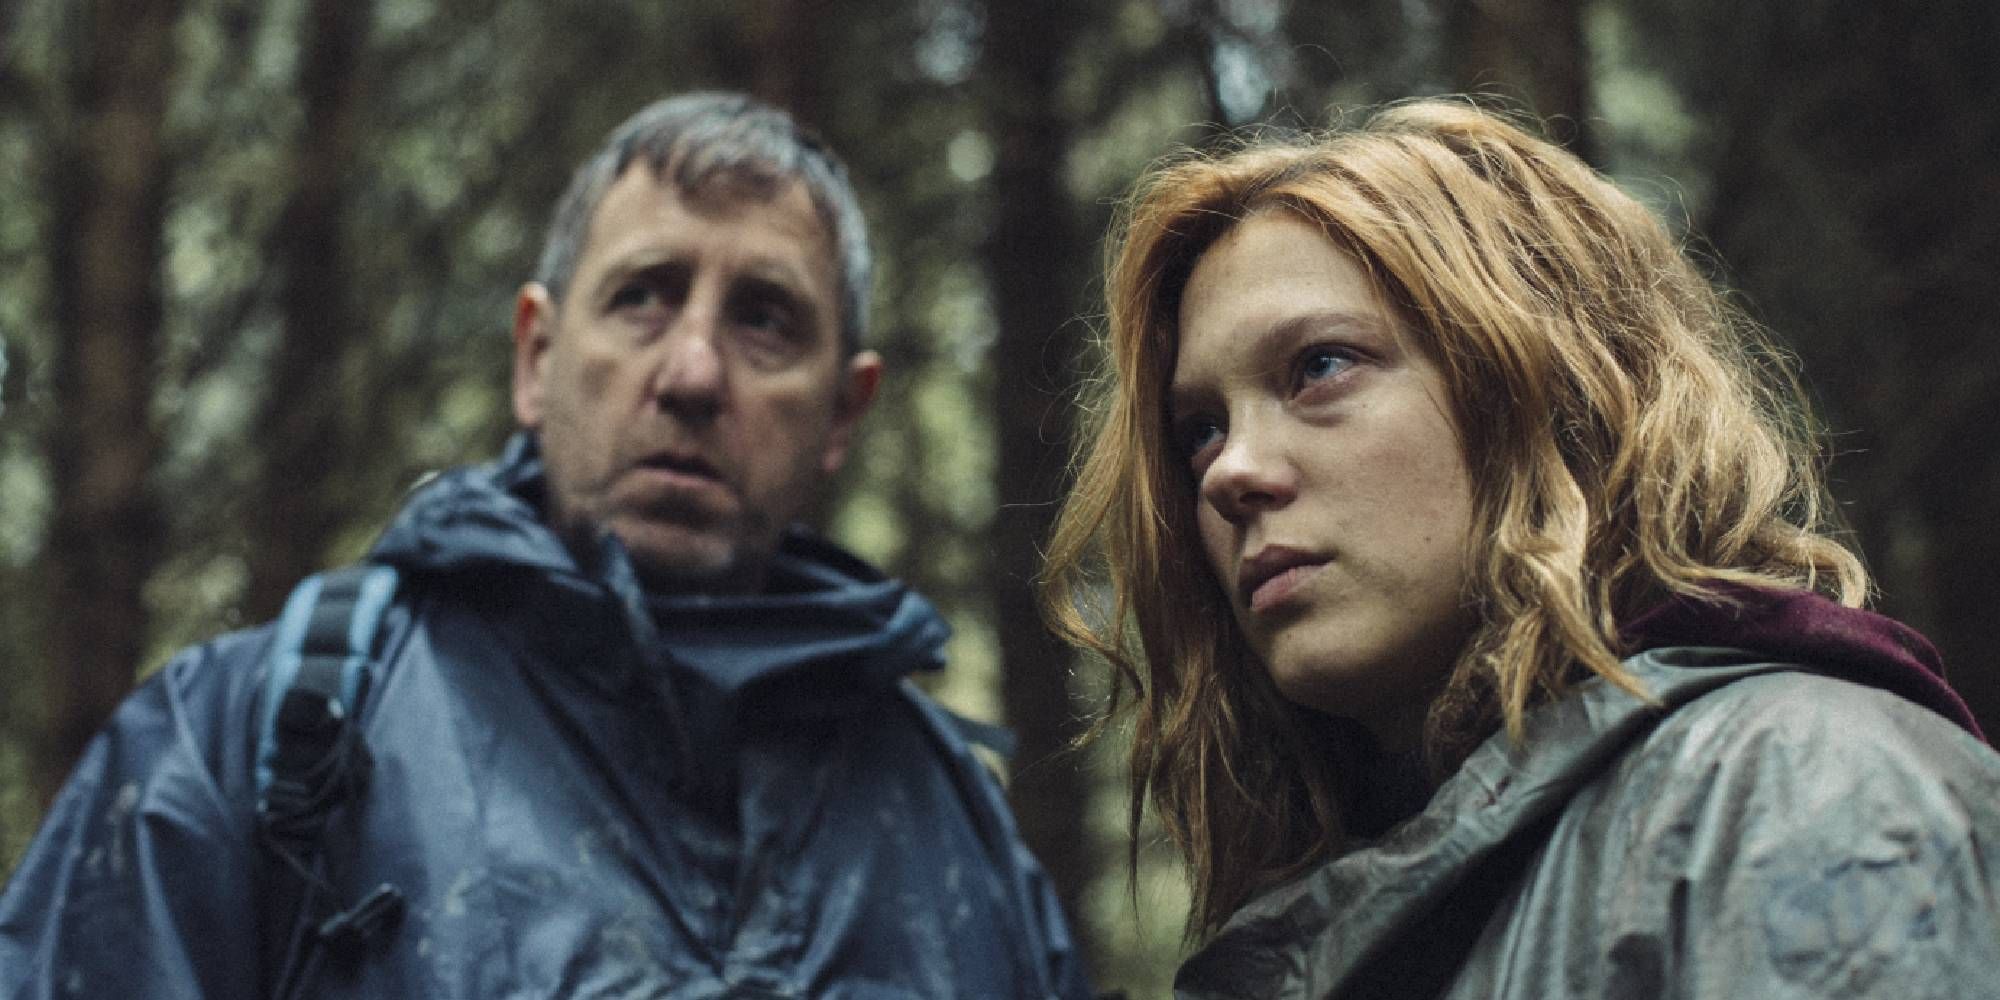 Michael Smiley and Léa Seydoux in The Lobster looking at something or someone off-camera while in the woods.